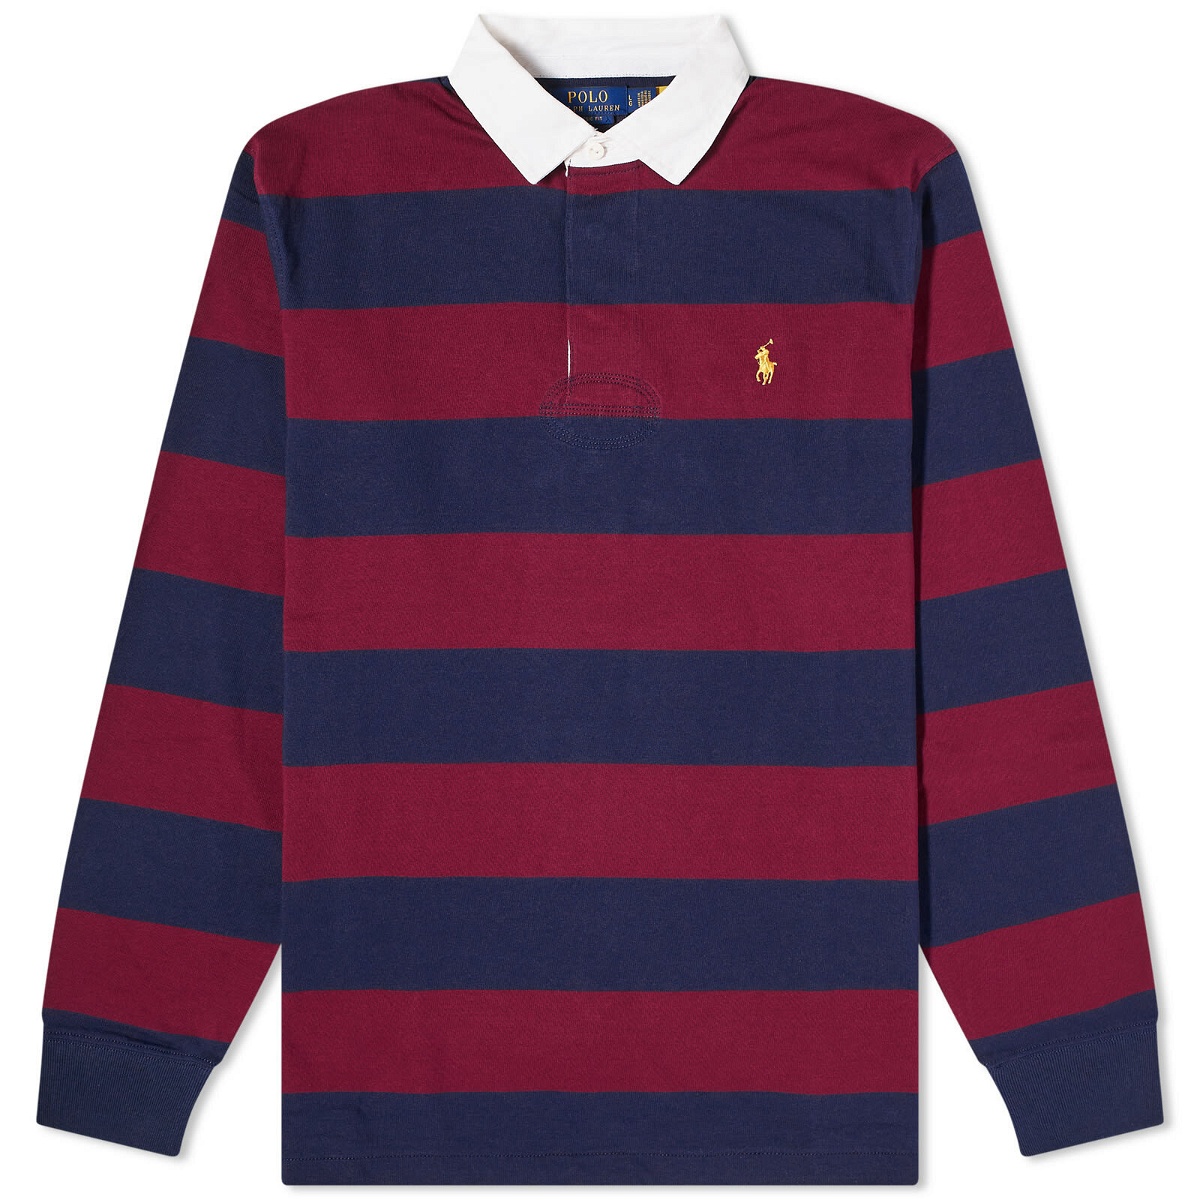 Photo: Polo Ralph Lauren Men's Stripe Rugby Shirt in Cruise Navy& Classic Wine